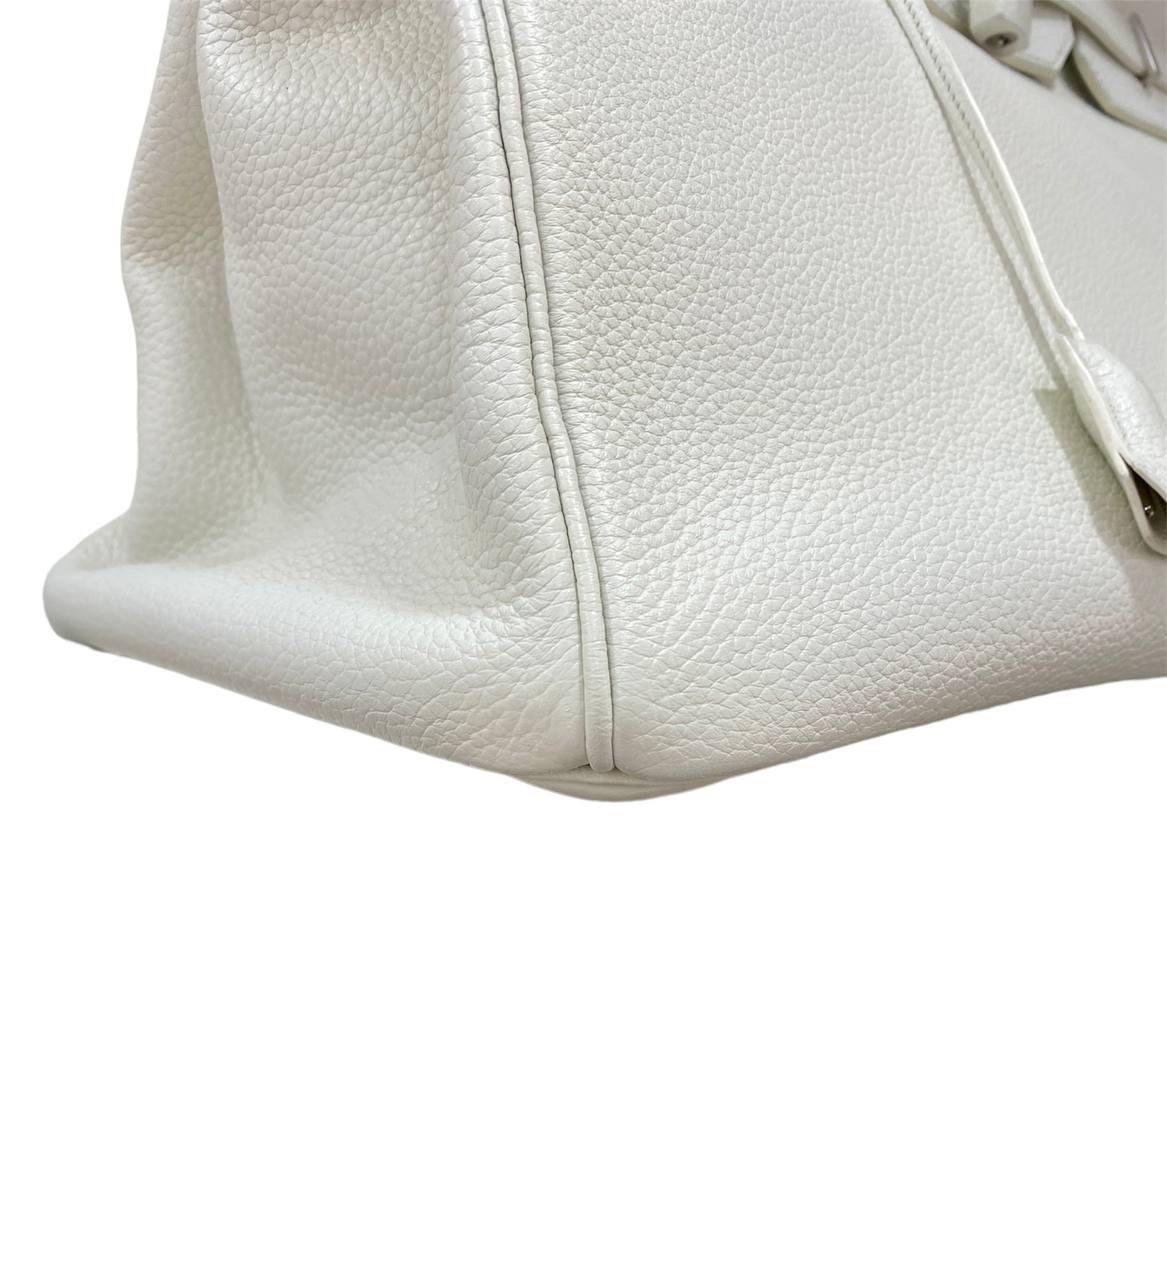 2011 Hermès Birkin 40 White Clemence Leather Top Handle Bag  For Sale 3